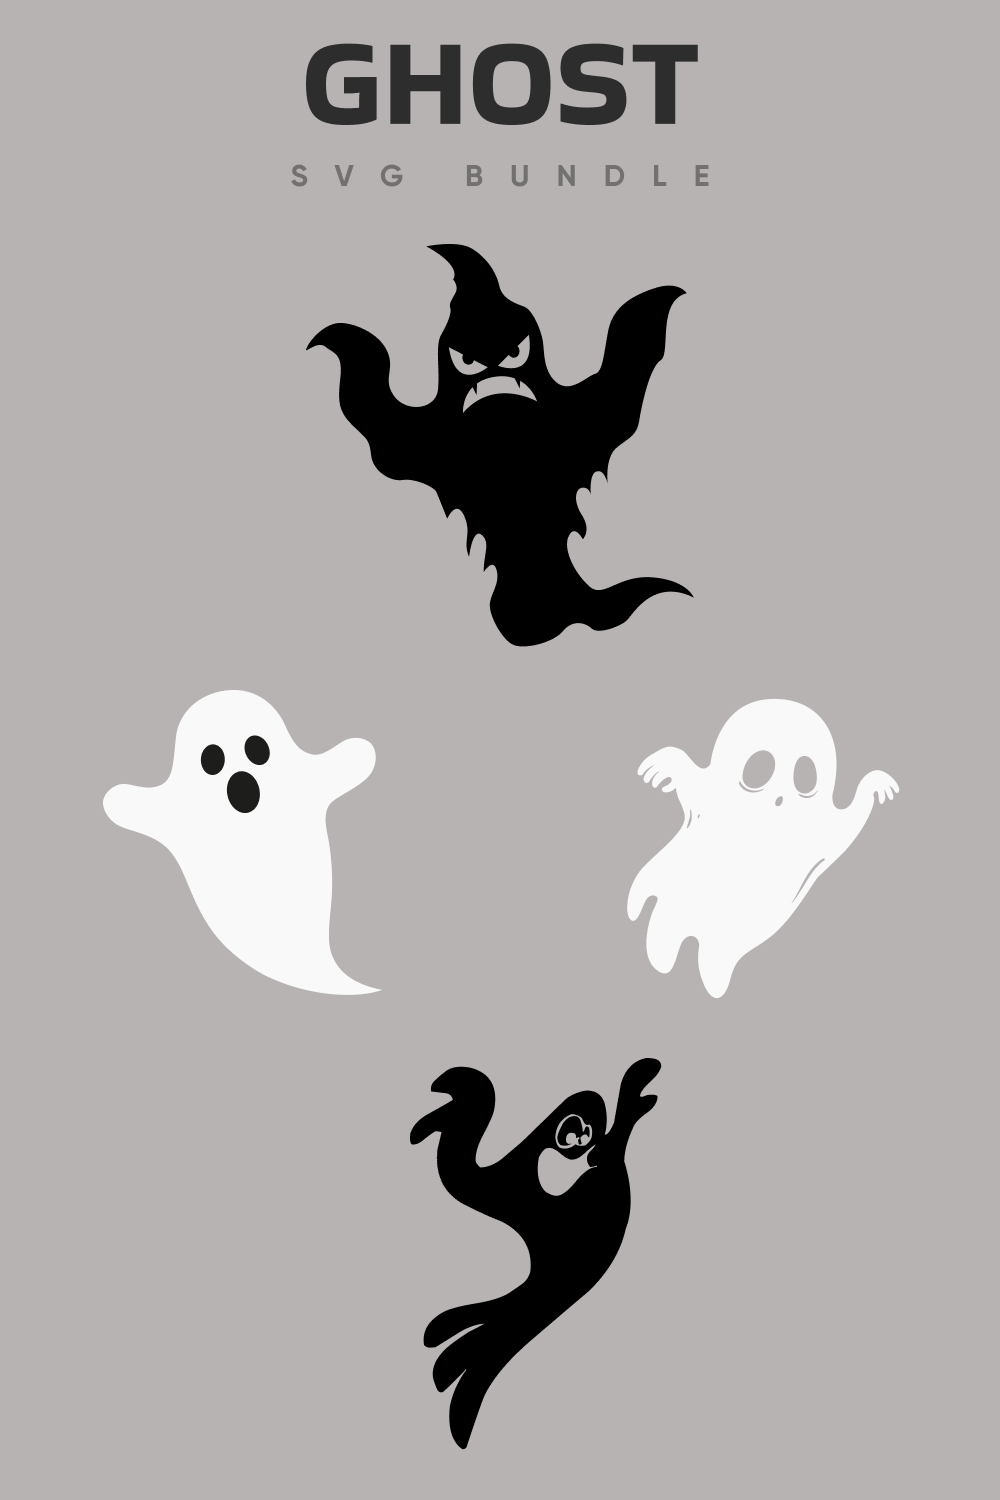 Ghost various in the different colors.